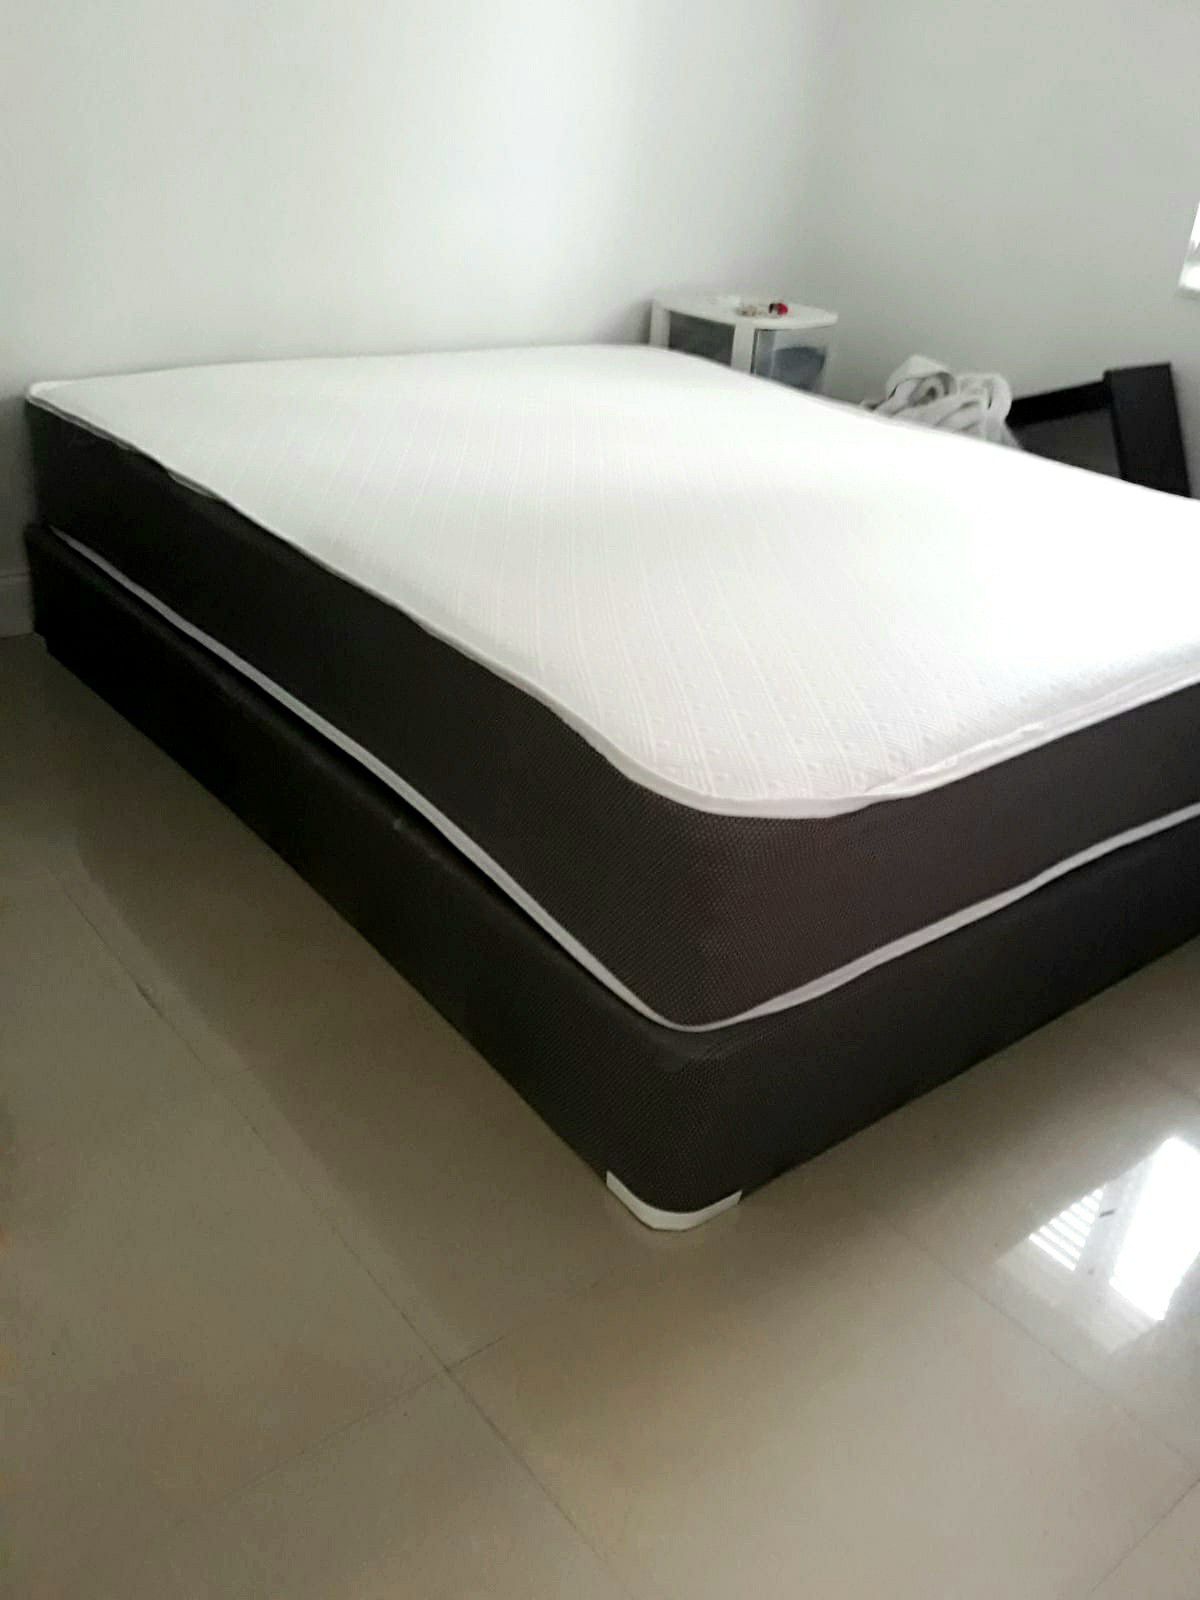 New QUEEN size mattress & BOX spring. Bed frame not included on offer